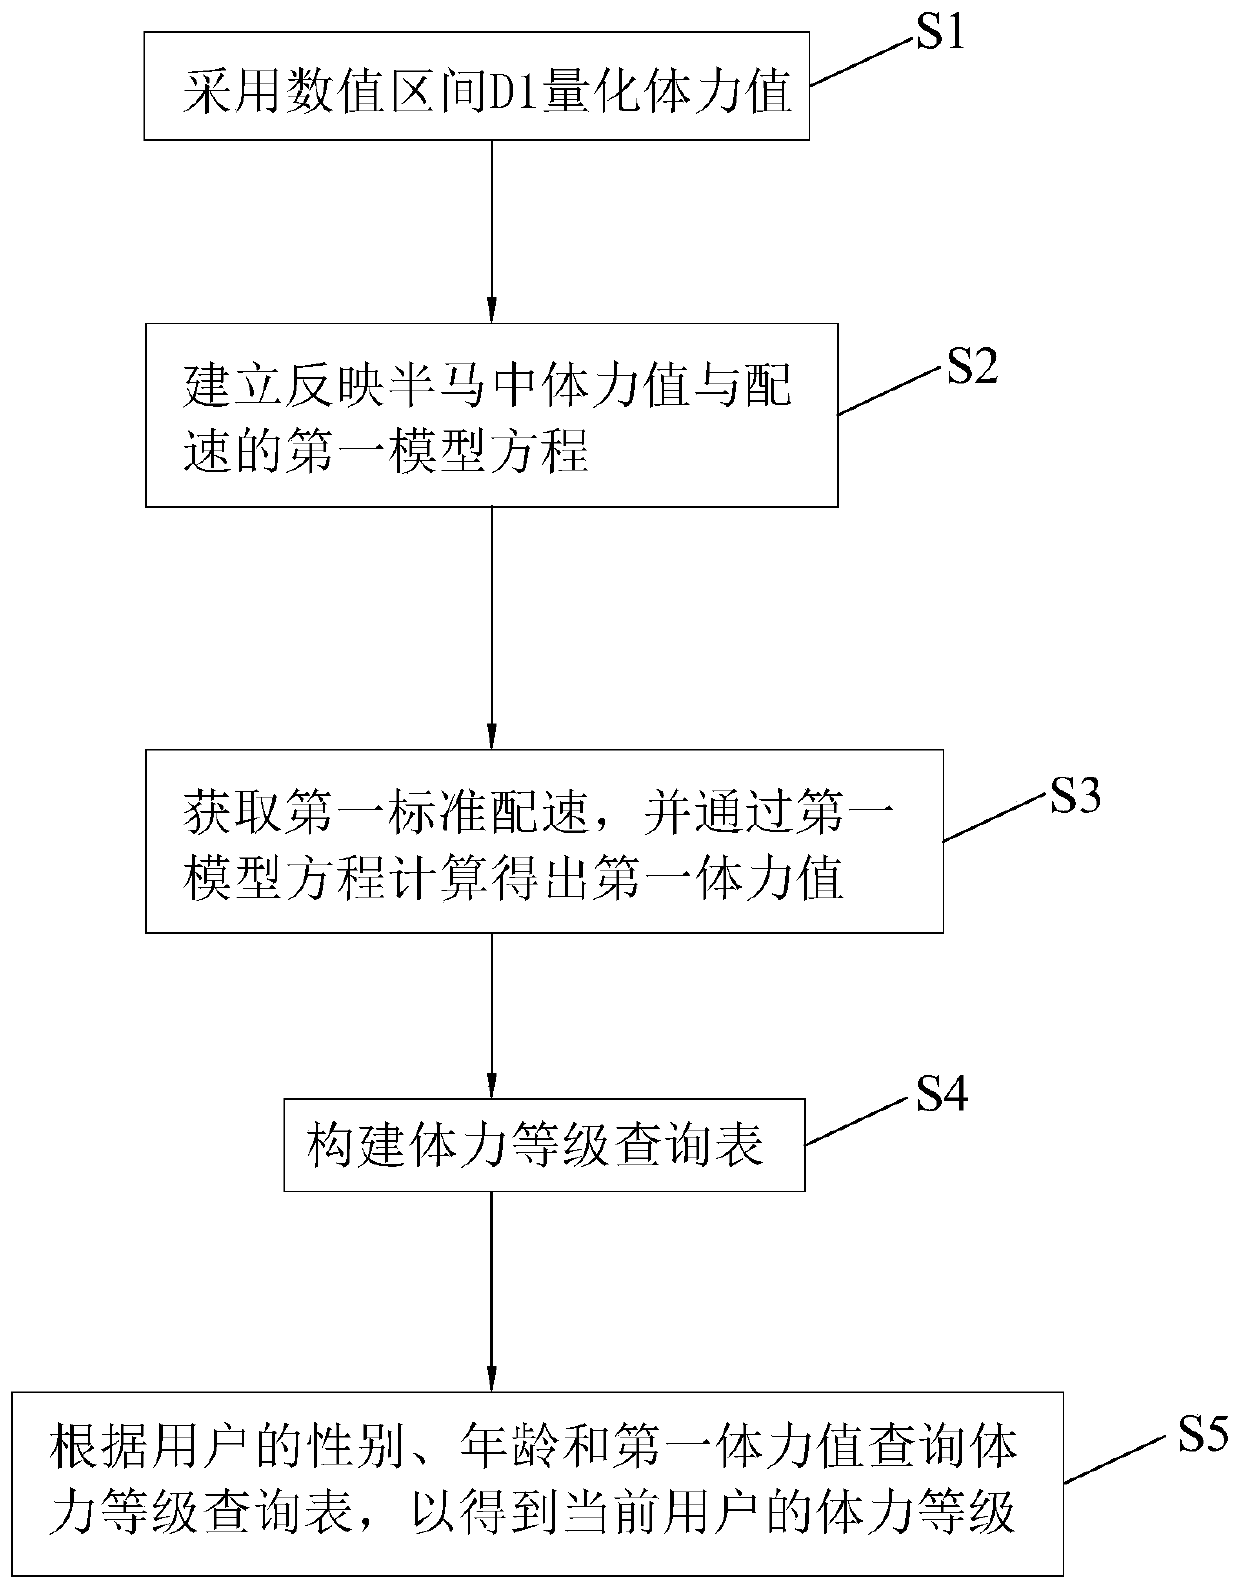 Method and equipment for evaluating physical indexes in running exercise